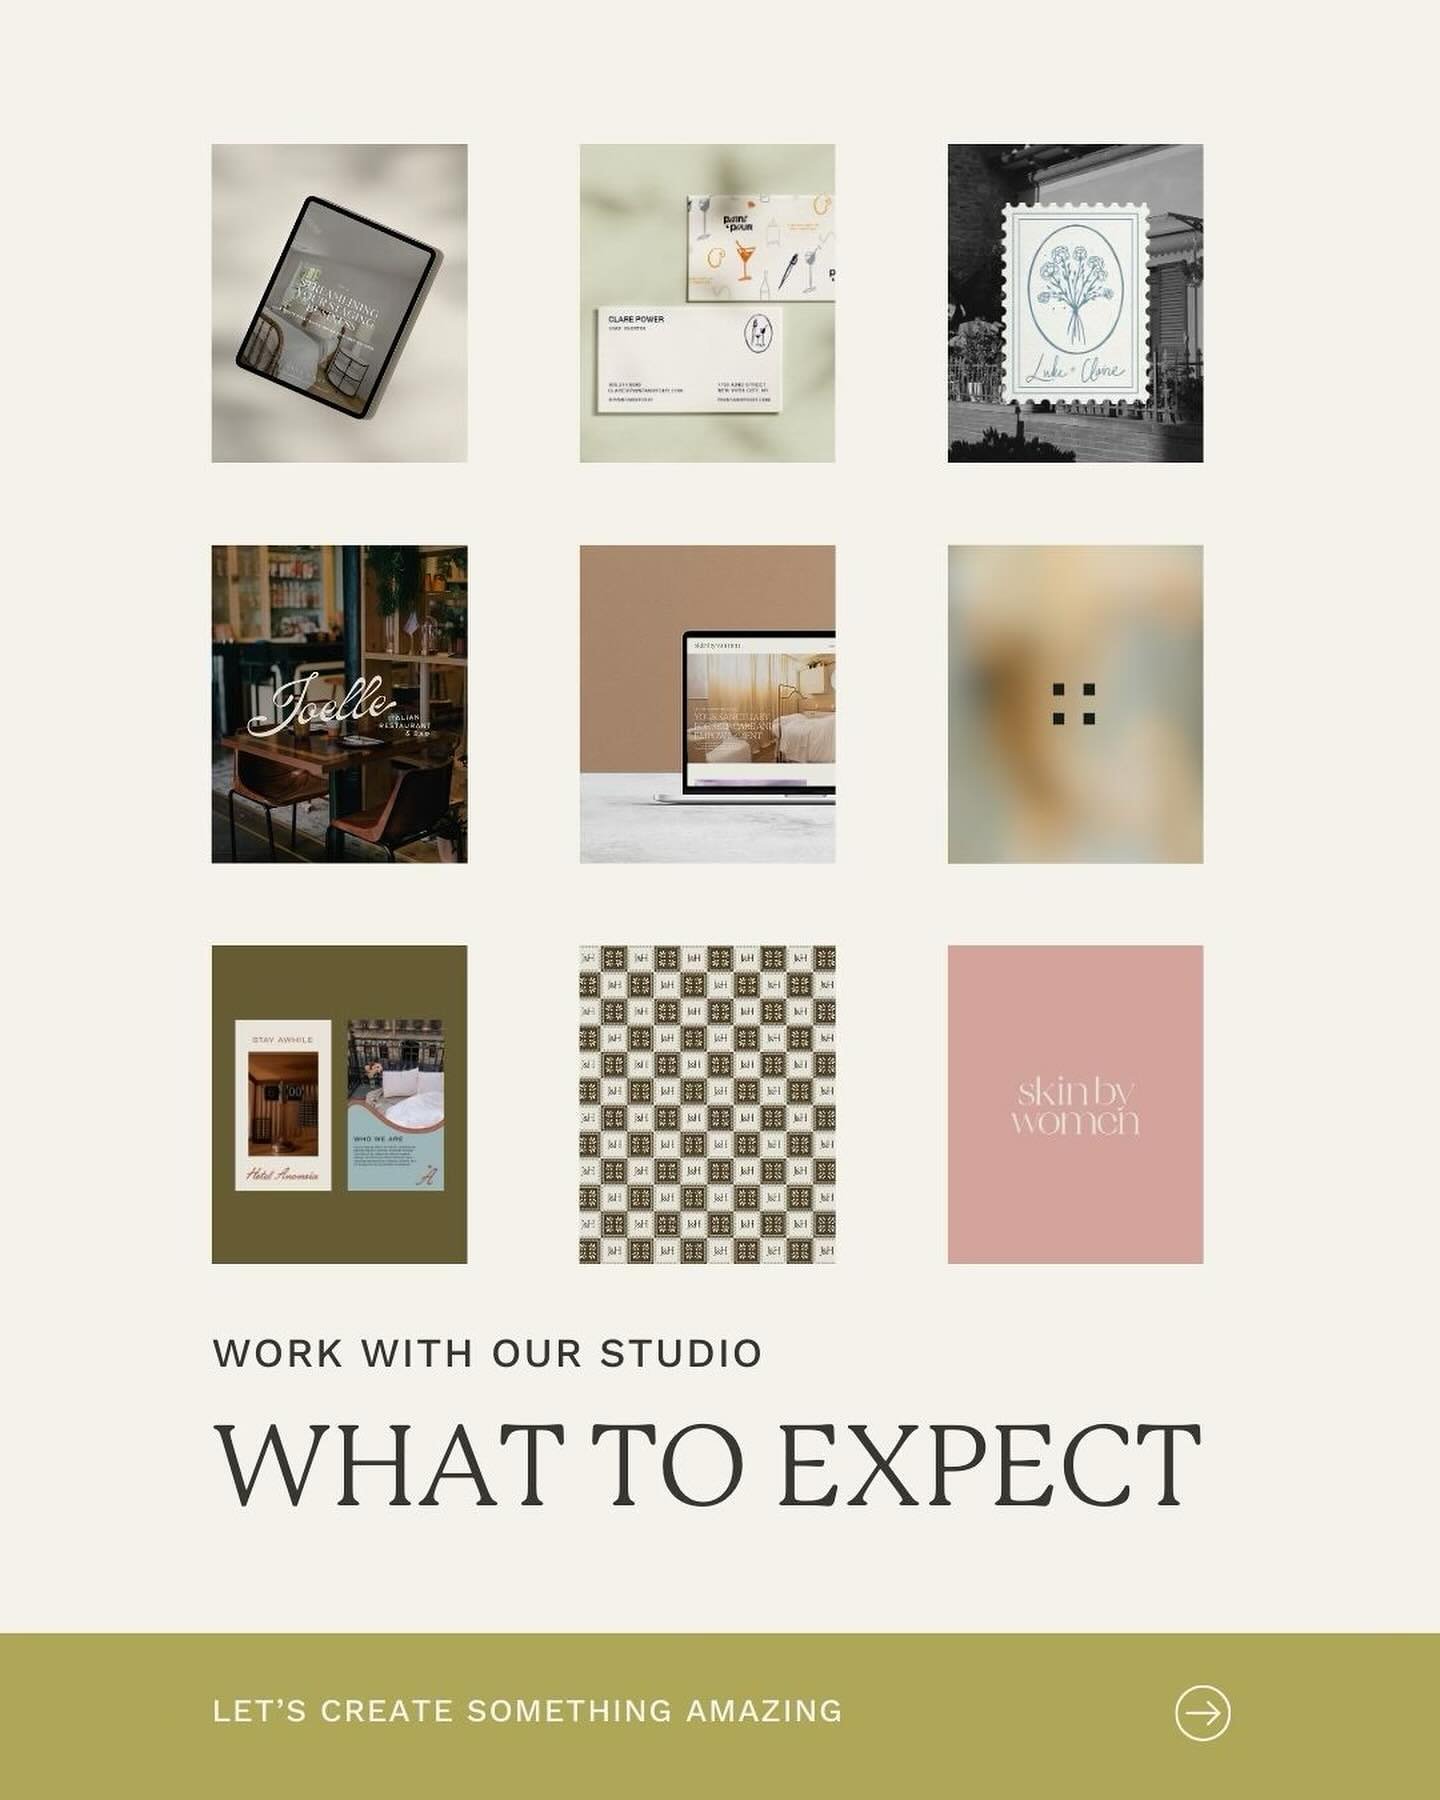 Ever wonder what it&rsquo;s like to work with a brand + web design studio?

Download our What to Expect Guide - from full scope brand identities to social media templates, here is everything you can expect when working with our studio. 

Comment GUID